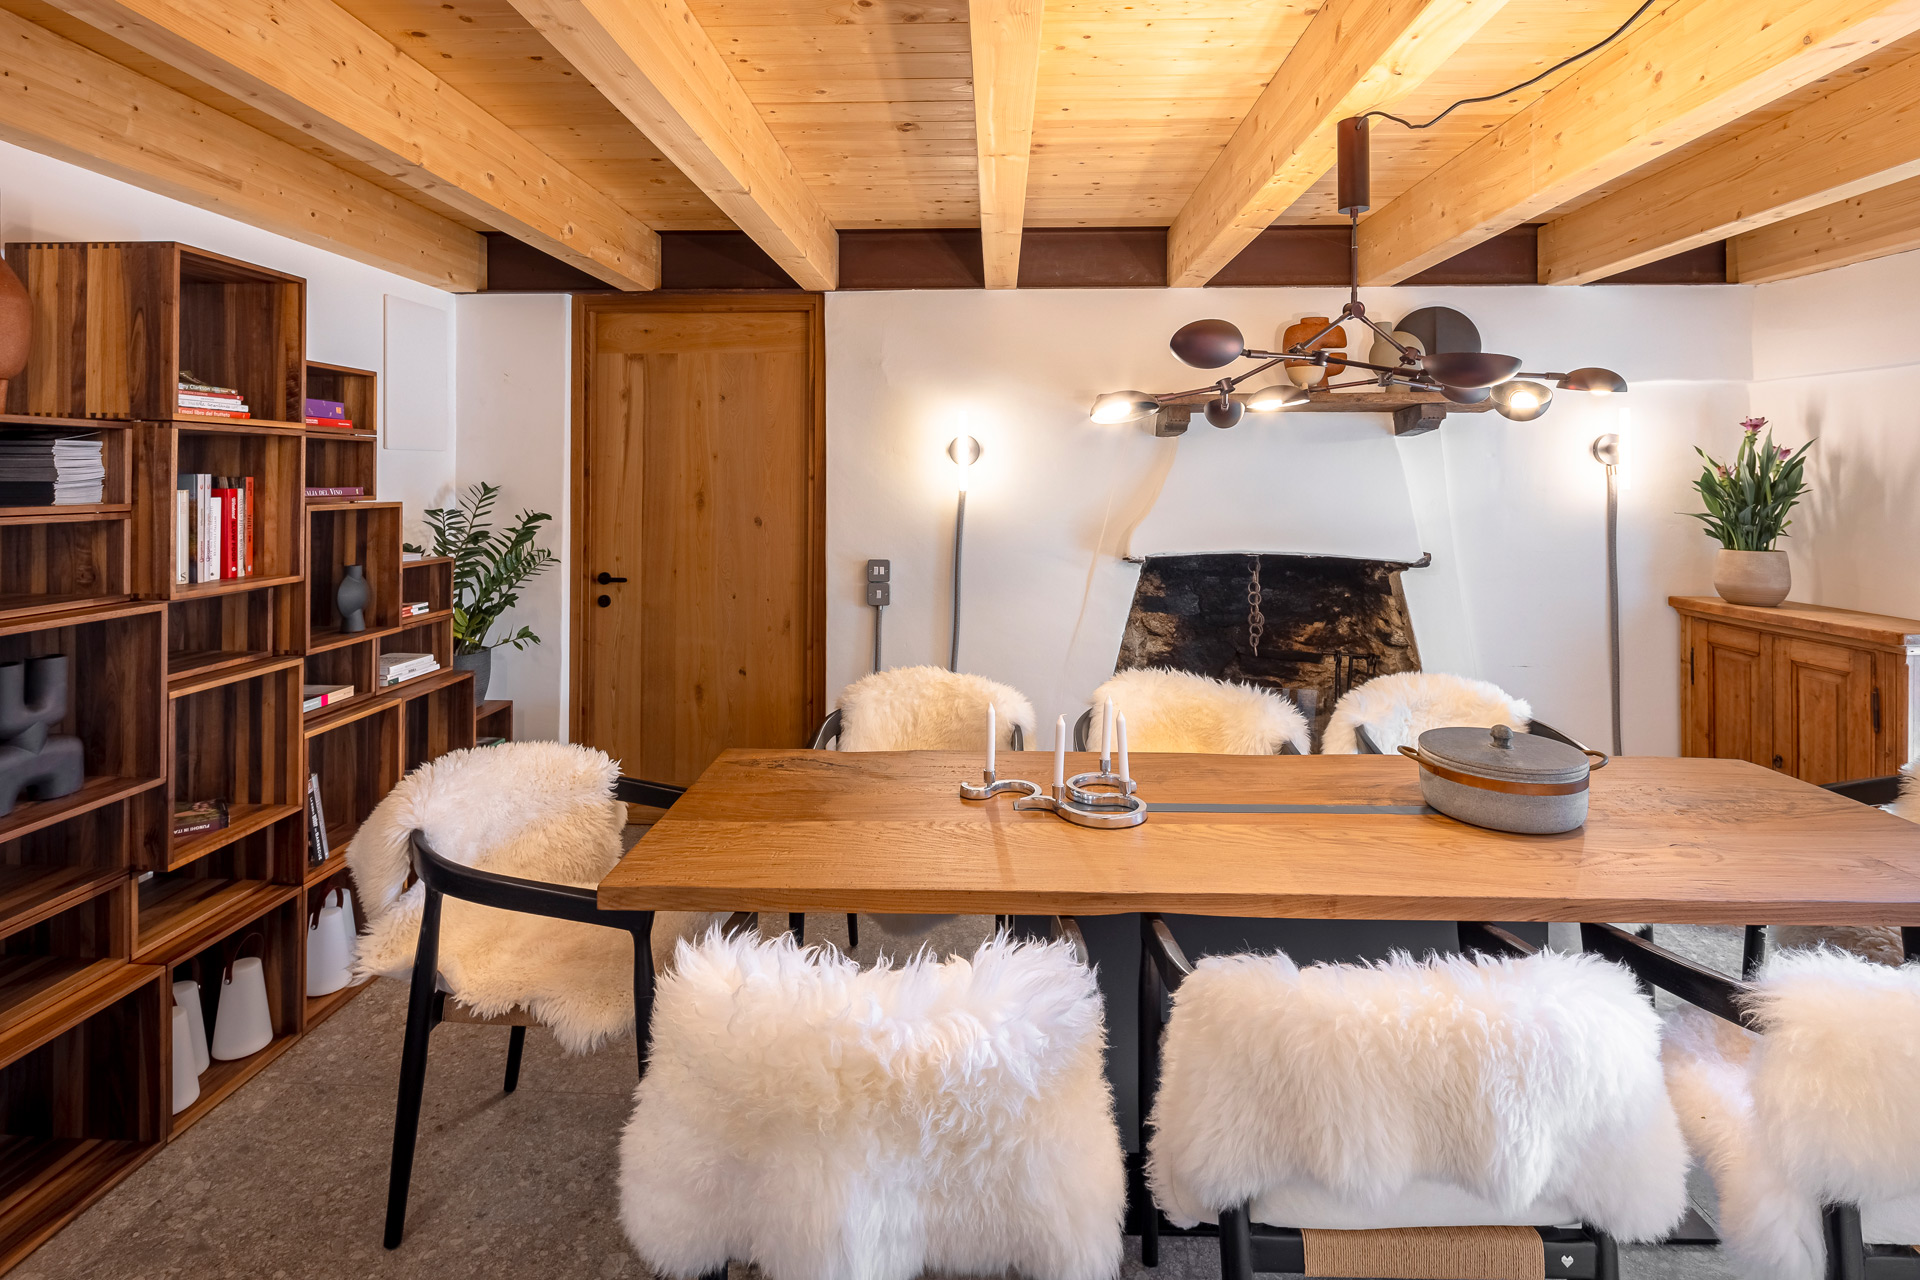 Dining room with wooden table, bookshelves and ceiling beams, with fur-covered chairs.